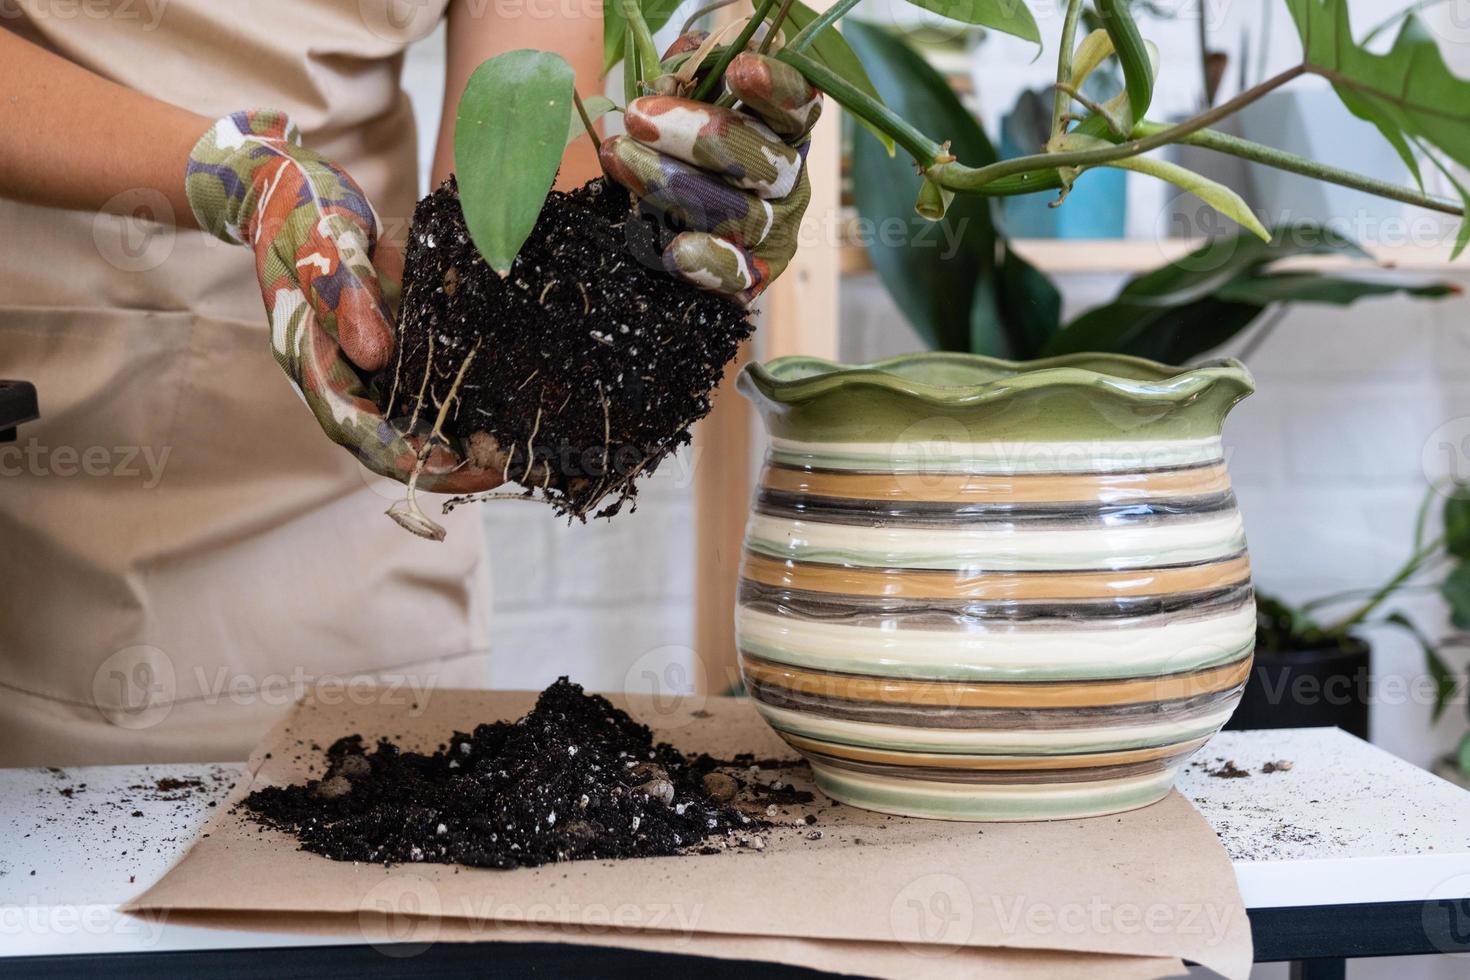 Transplanting a home plant Philodendron into a new pot. A woman plants a stalk with roots in a new soil. Caring and reproduction for a potted plant, hands close-up photo